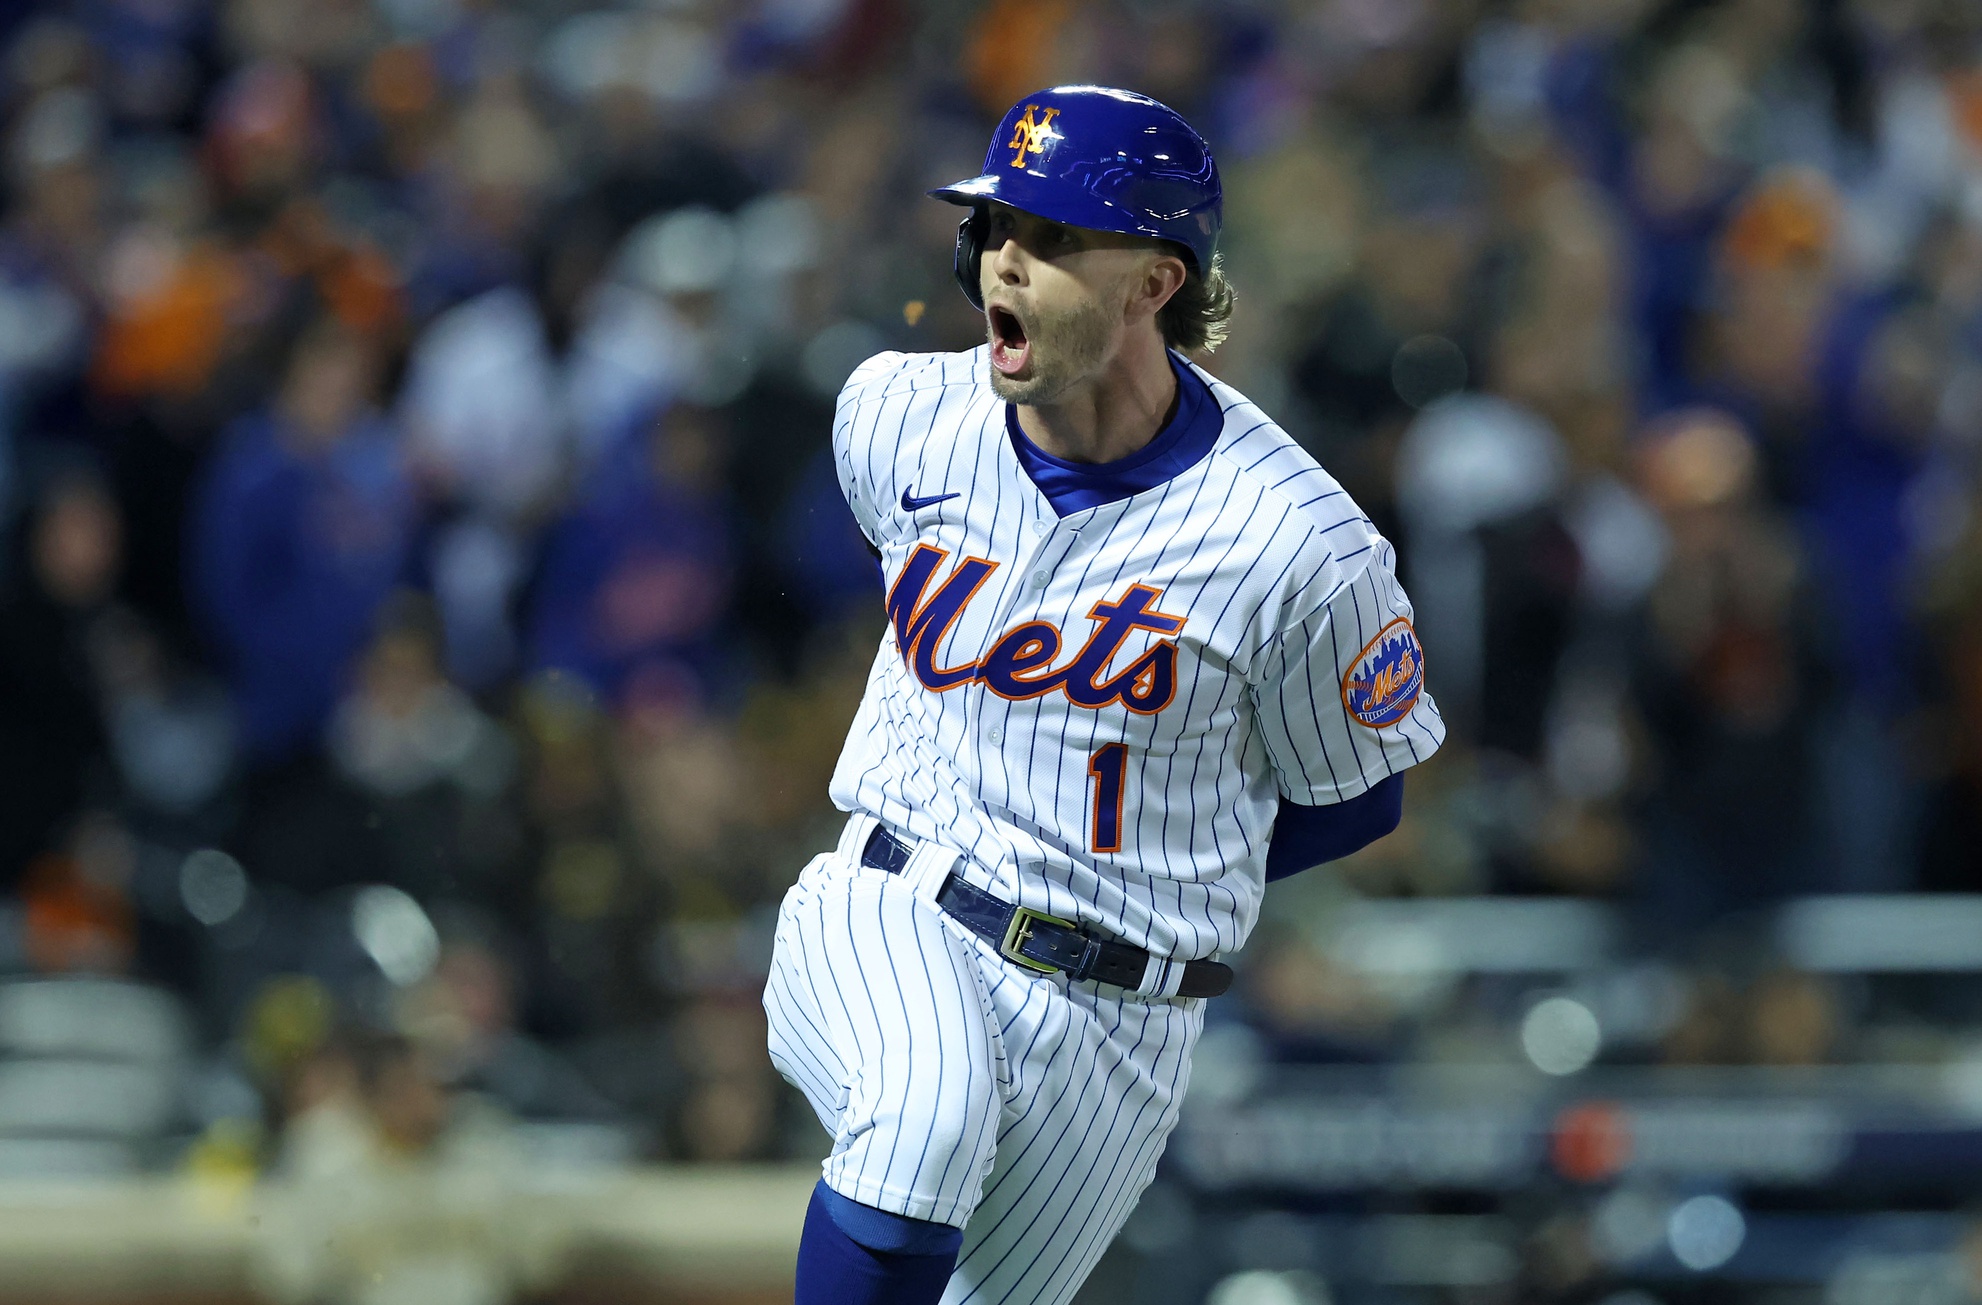 NY Mets vs. Padres: NL Wild Card series 2022 schedule, preview